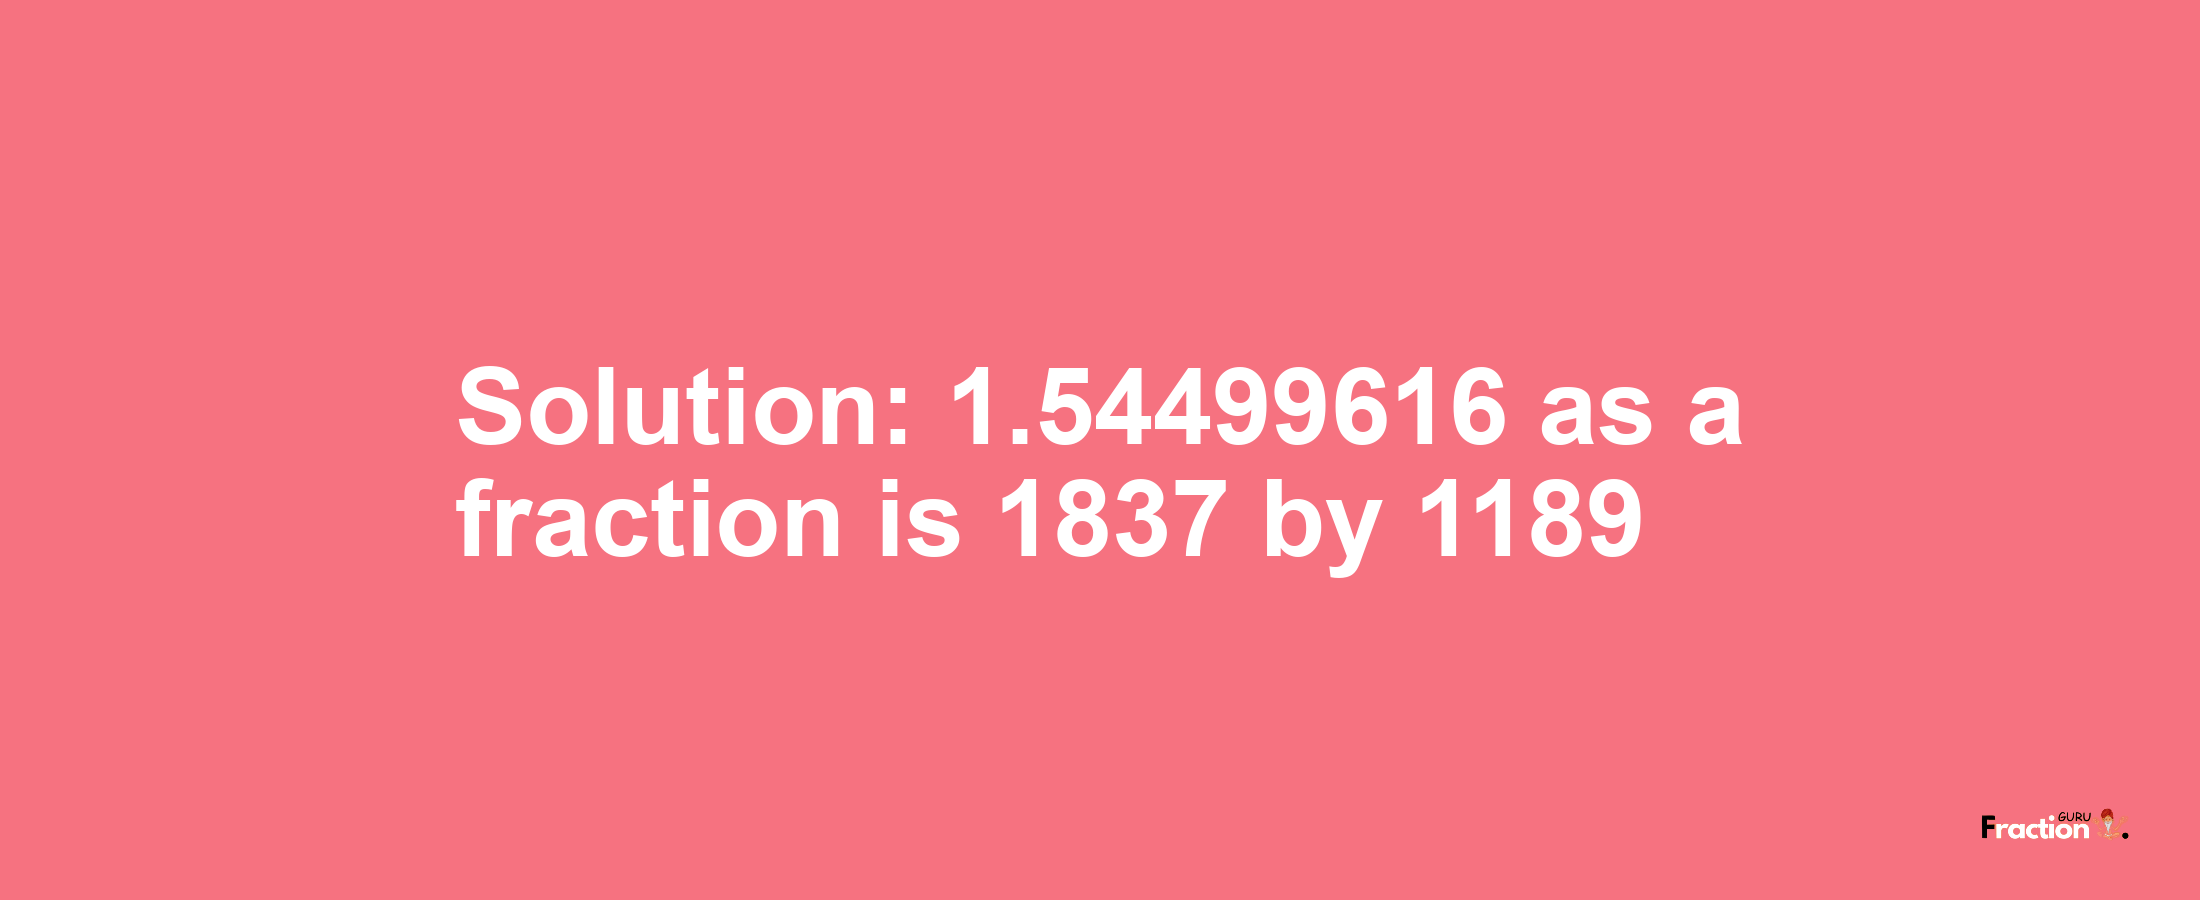 Solution:1.54499616 as a fraction is 1837/1189